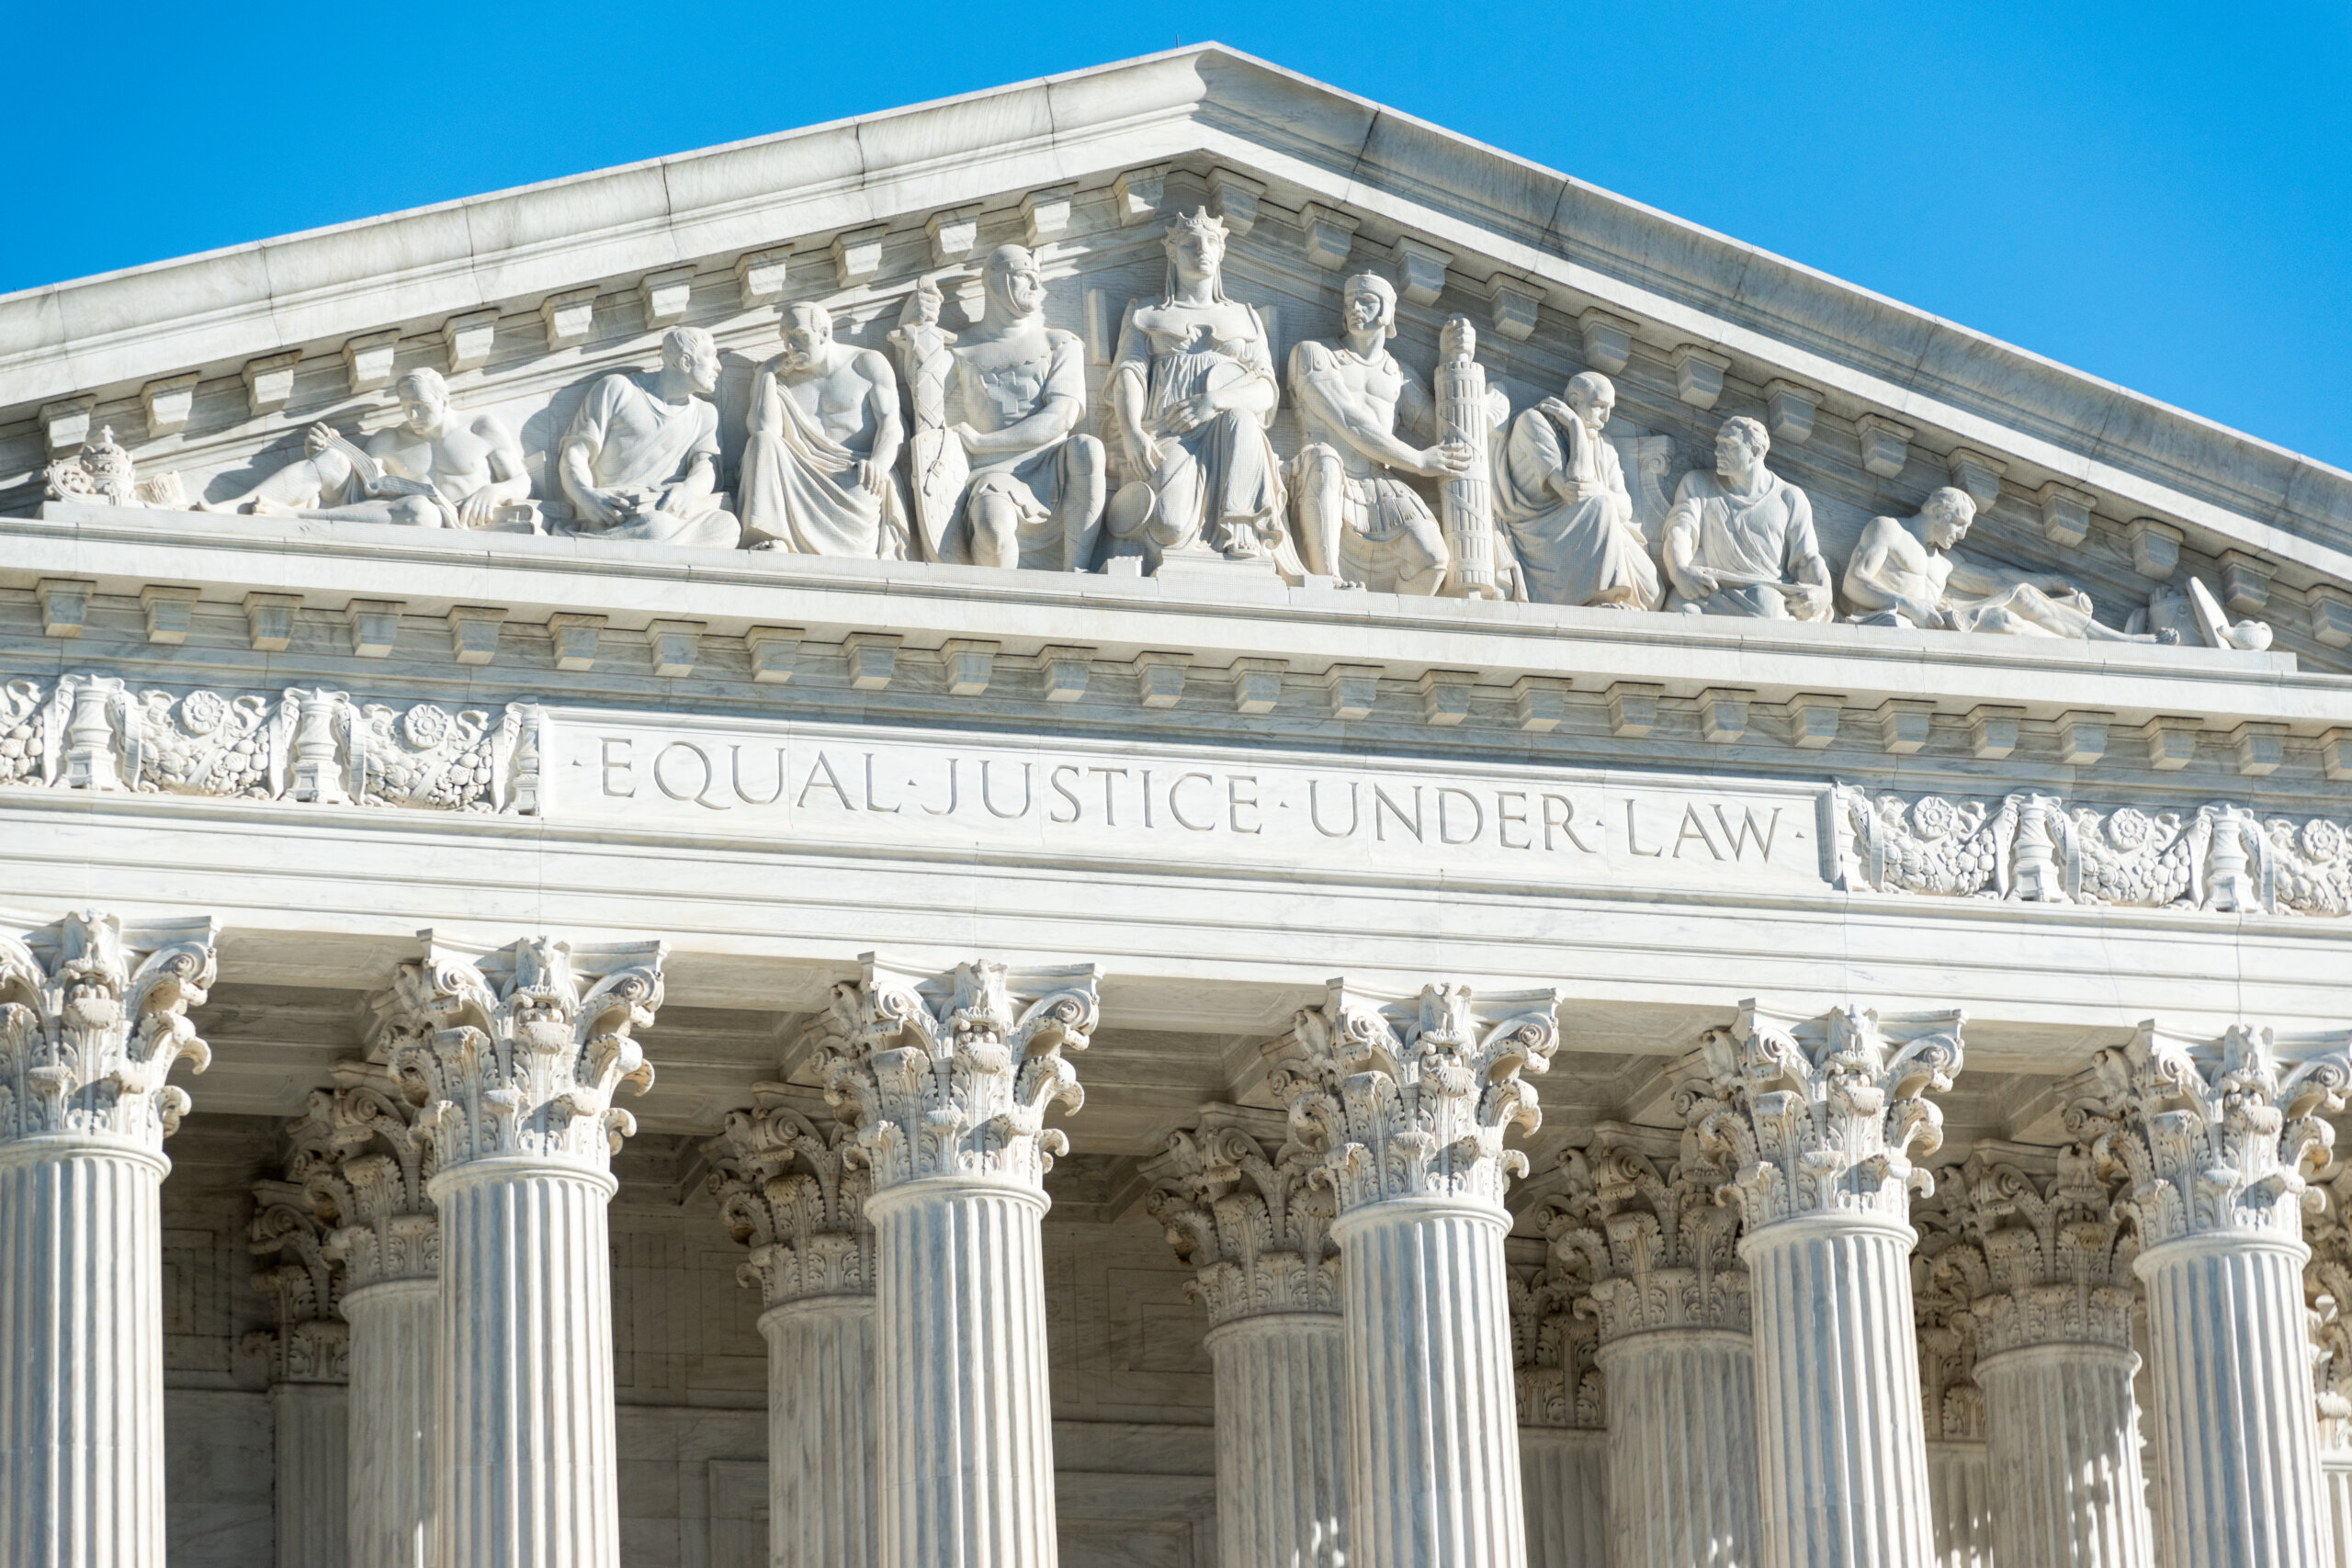 Exterior of Supreme Court showing inscription saying: "Equal Justice Under Law"